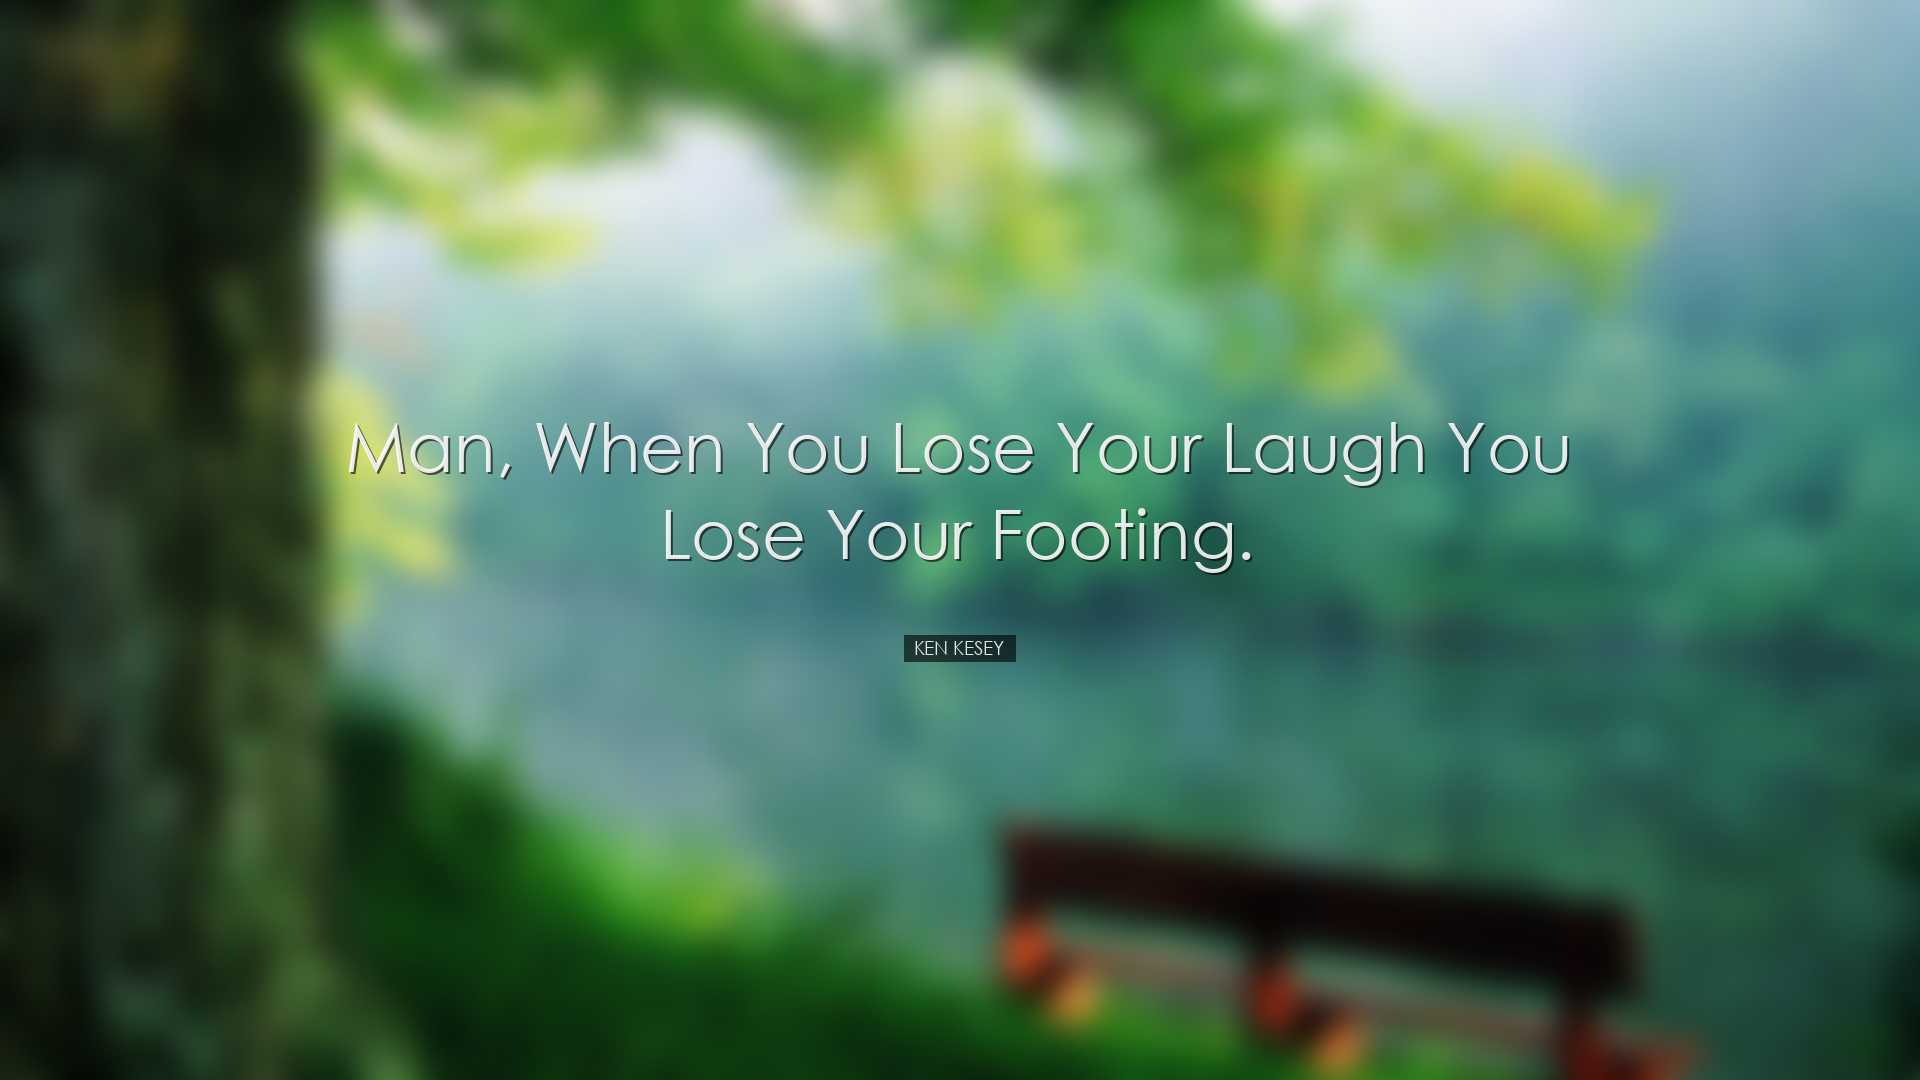 Man, when you lose your laugh you lose your footing. - Ken Kesey